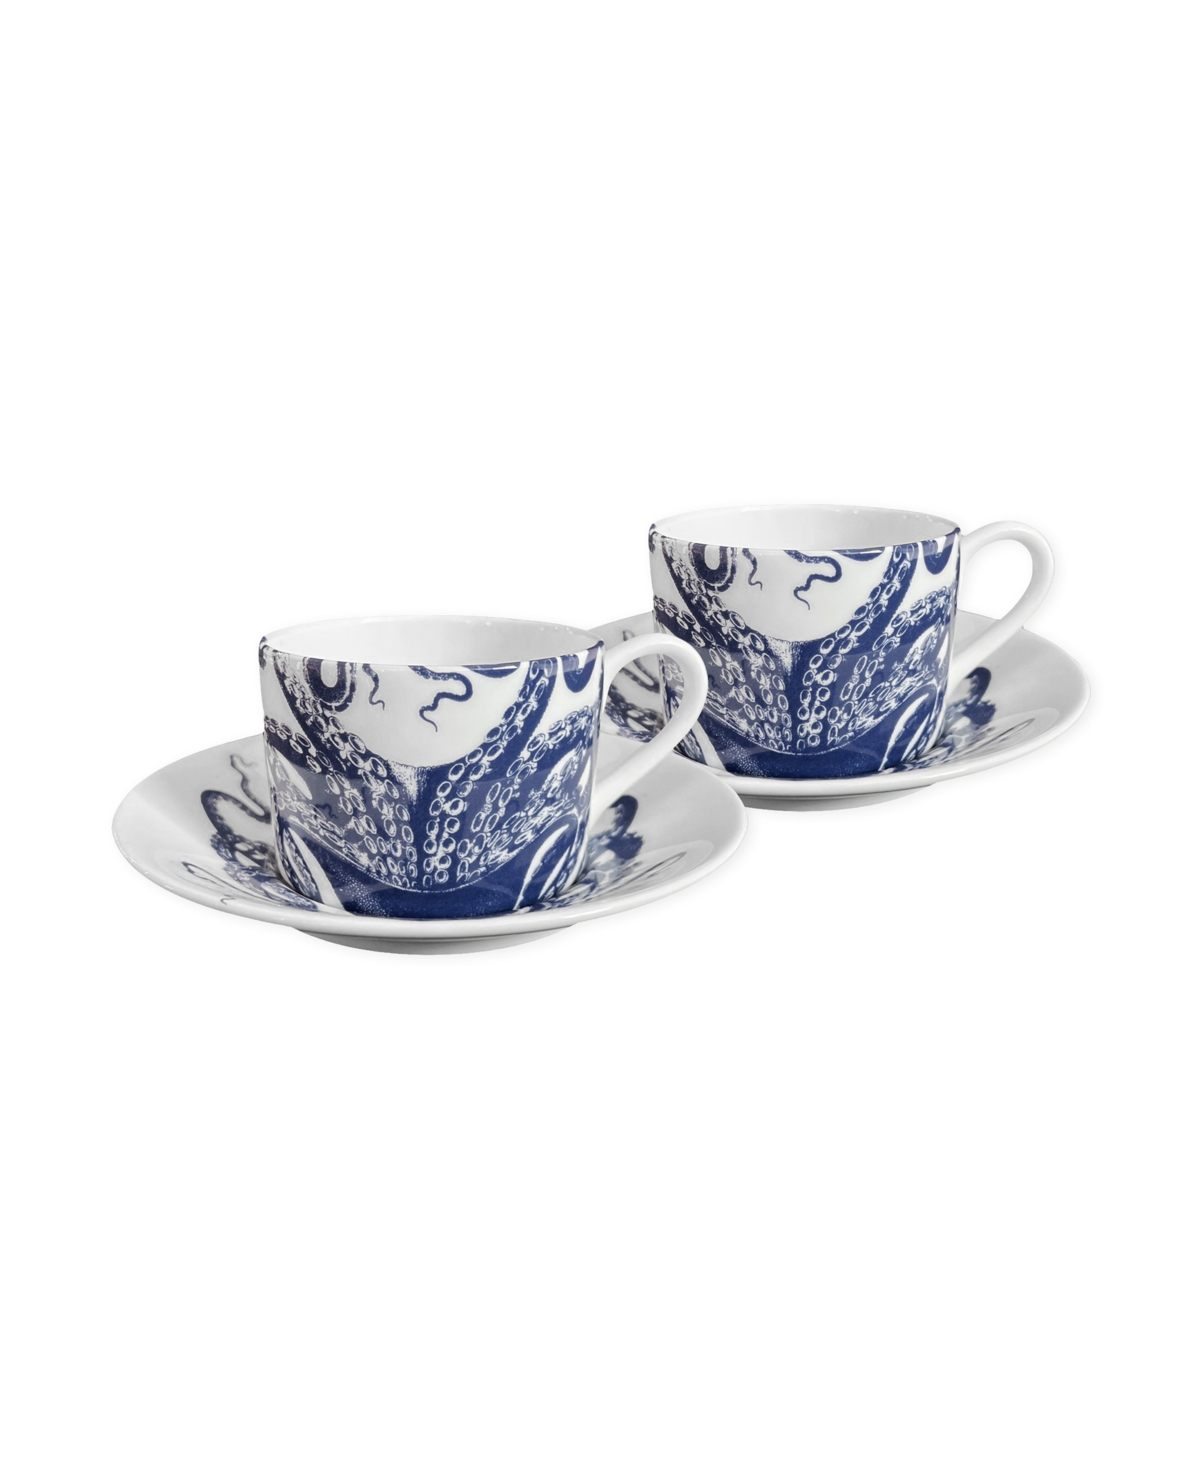 Lucy Octopus Cup and Saucer 6 oz, Set of 2 - Blue on White